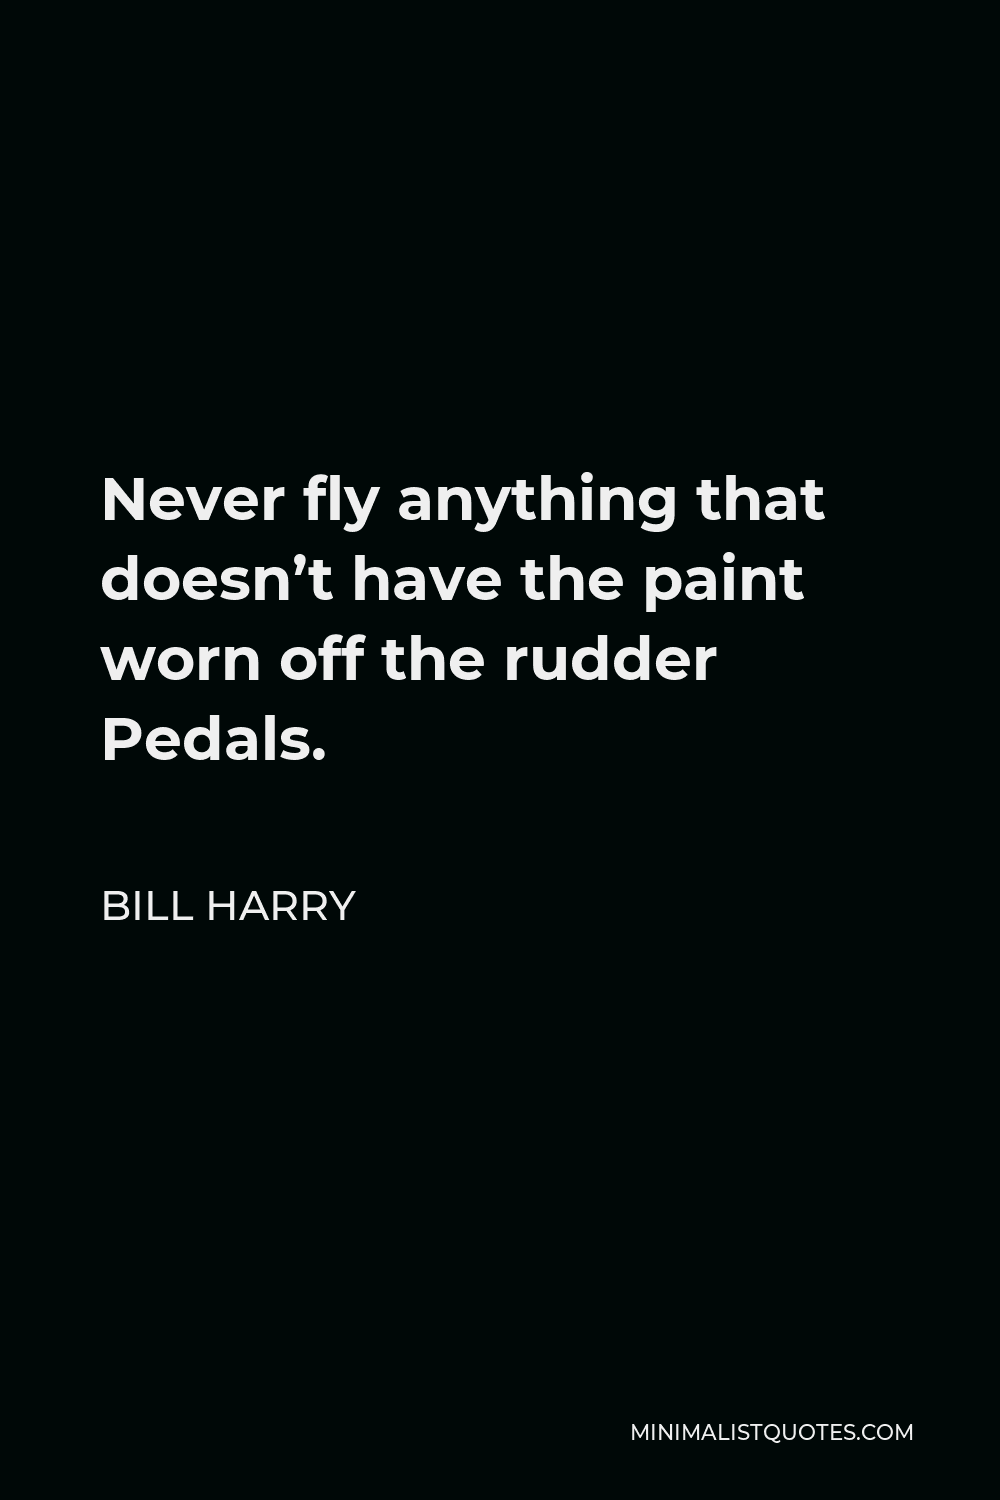 Bill Harry Quote - Never fly anything that doesn’t have the paint worn off the rudder Pedals.